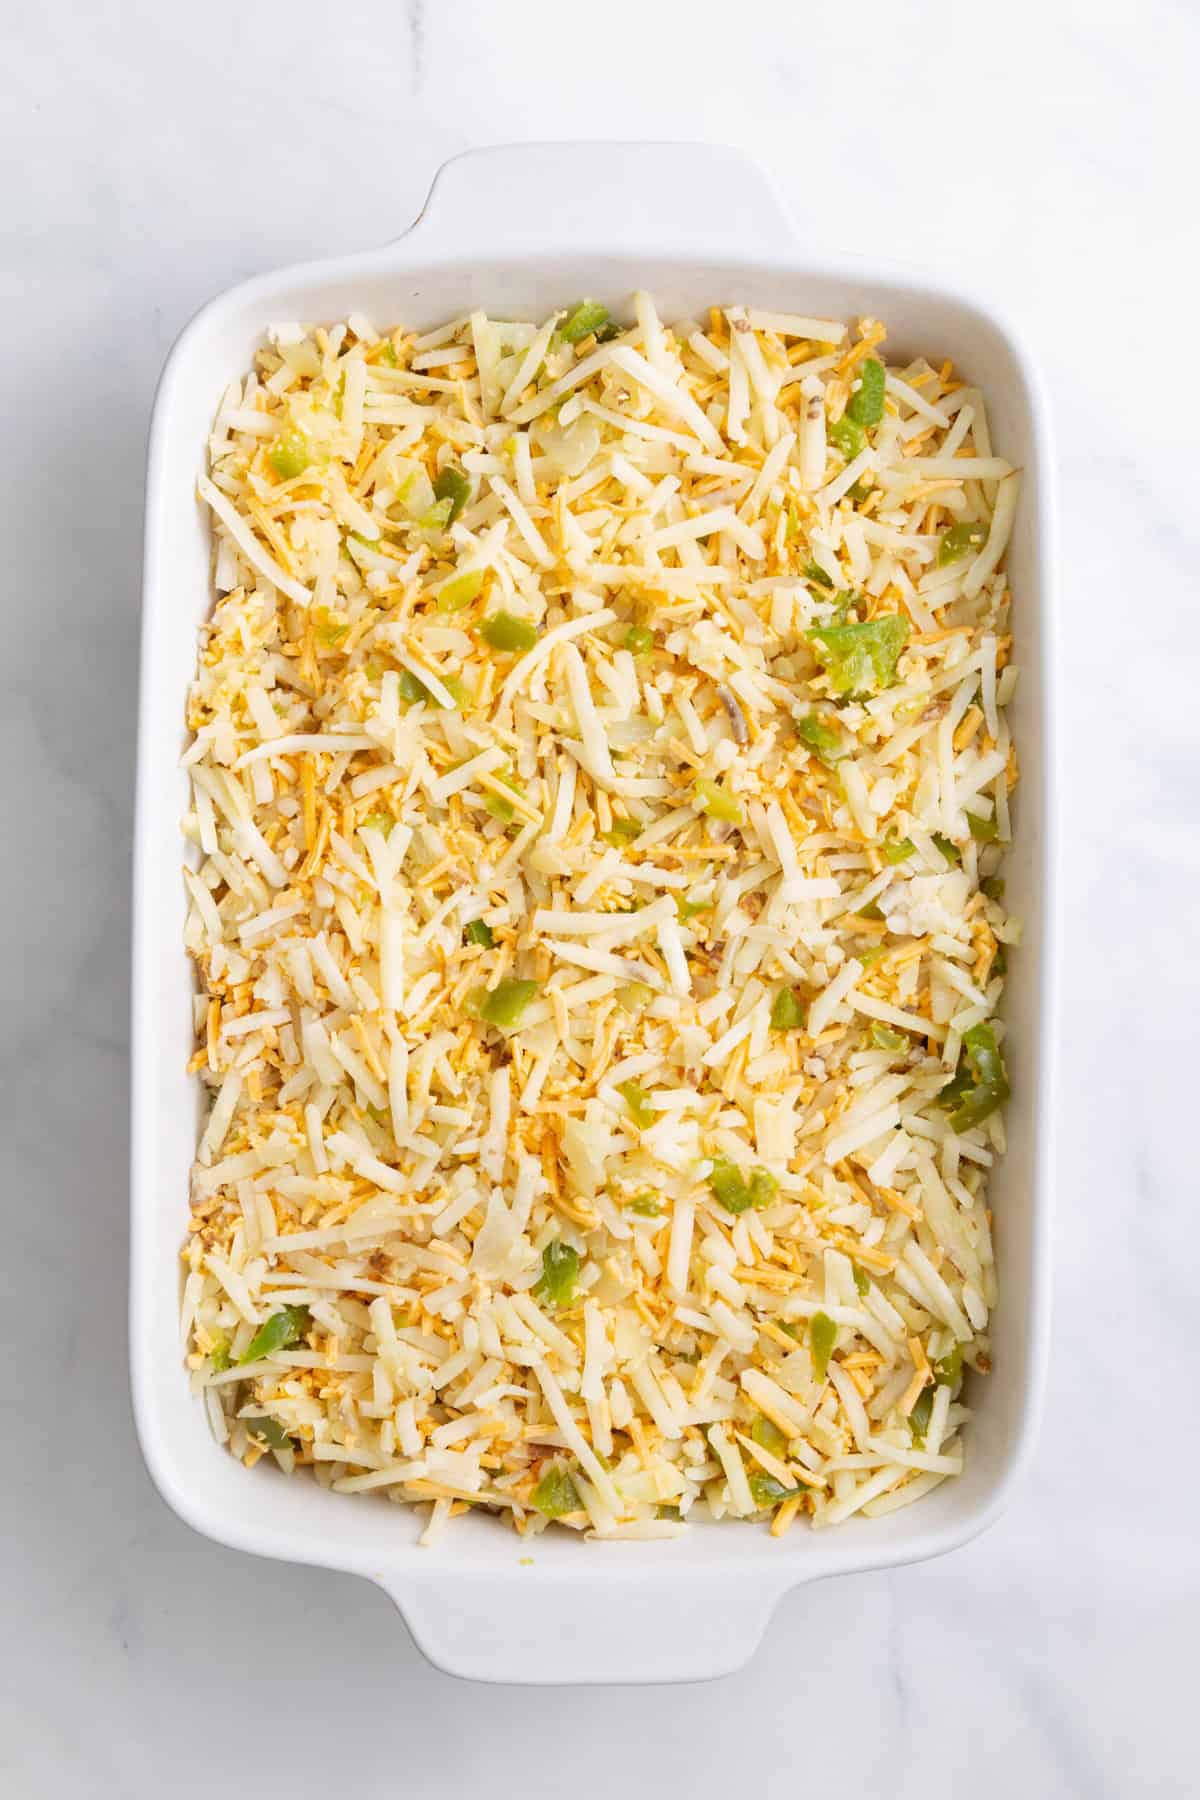 step 2 to make cheesy breakfast potato casserole, layer mixture and shredded cheese into a 9x12 inch casserole dish